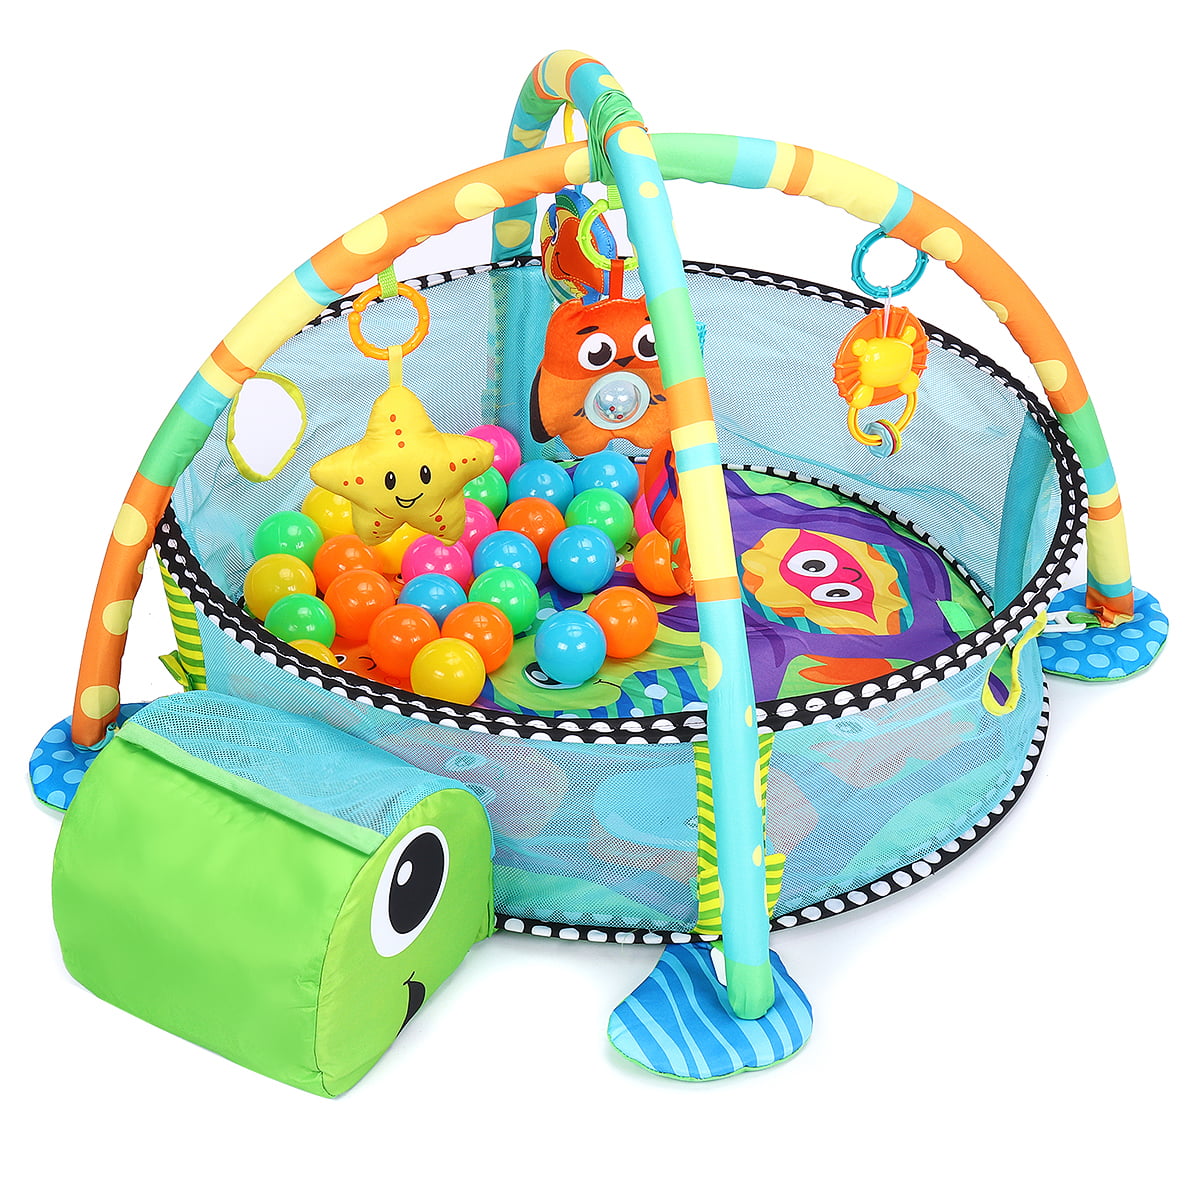 Educational Baby Activity Mat & Ball Pit 3 in 1 Baby Activity Gym with 4 Hanging Toys & 30 Balls Infant Playmat for Tummy Time Gift for 0-24 Month Baby Boys and Girls LATINKIS Baby Play Mat 